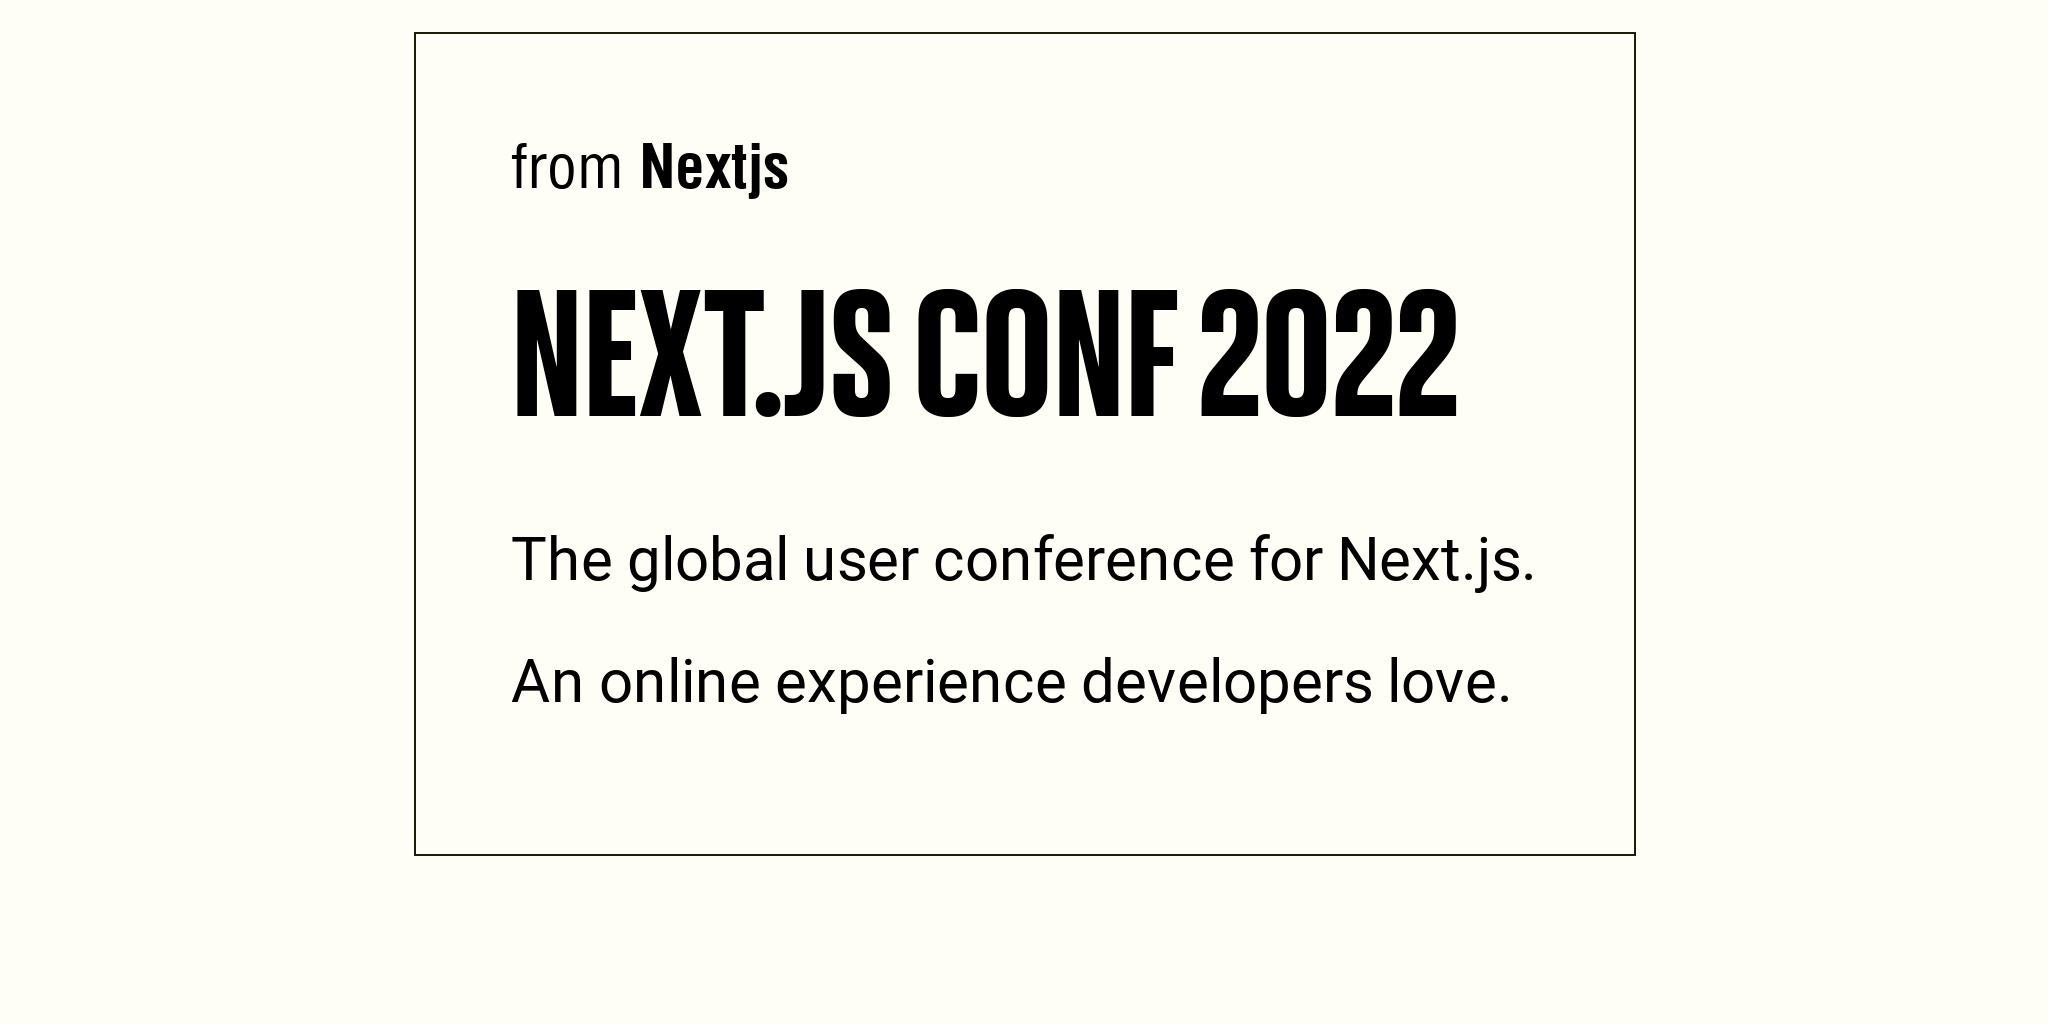 Next.js Conf 2022 Briefly